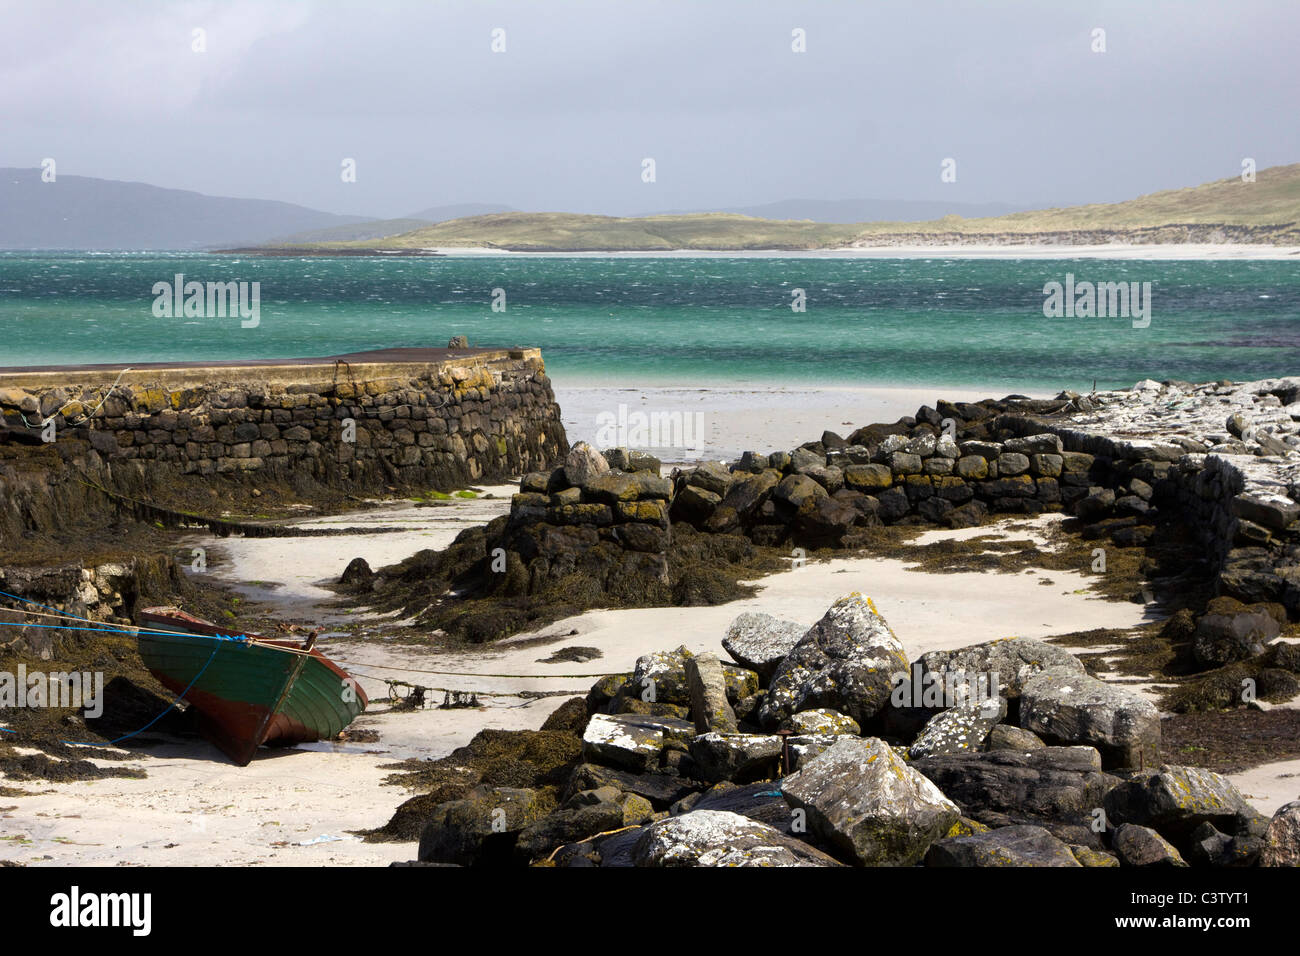 eoligarry old disused jetty  isle of barra outer hebrides western isles scotland Stock Photo